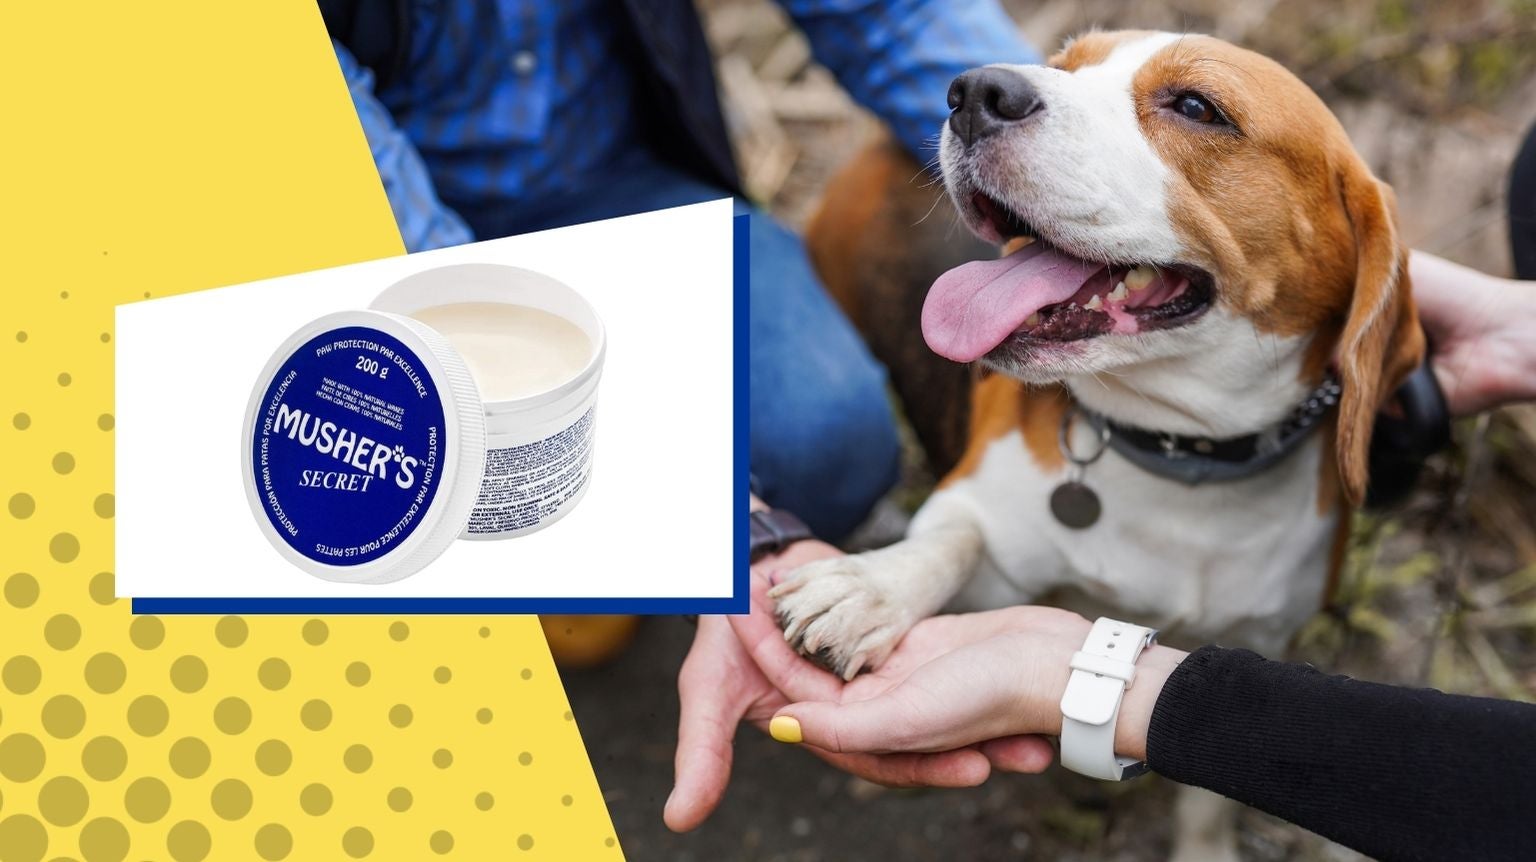 Protect & Restore Cracked and Chapped Dog Paws & Pads All Natural Soothing & Healing for Dry Cracking Rough Pet Skin Organic Paw or Nose Balm for Dogs & Cats Better Than Paw Wax